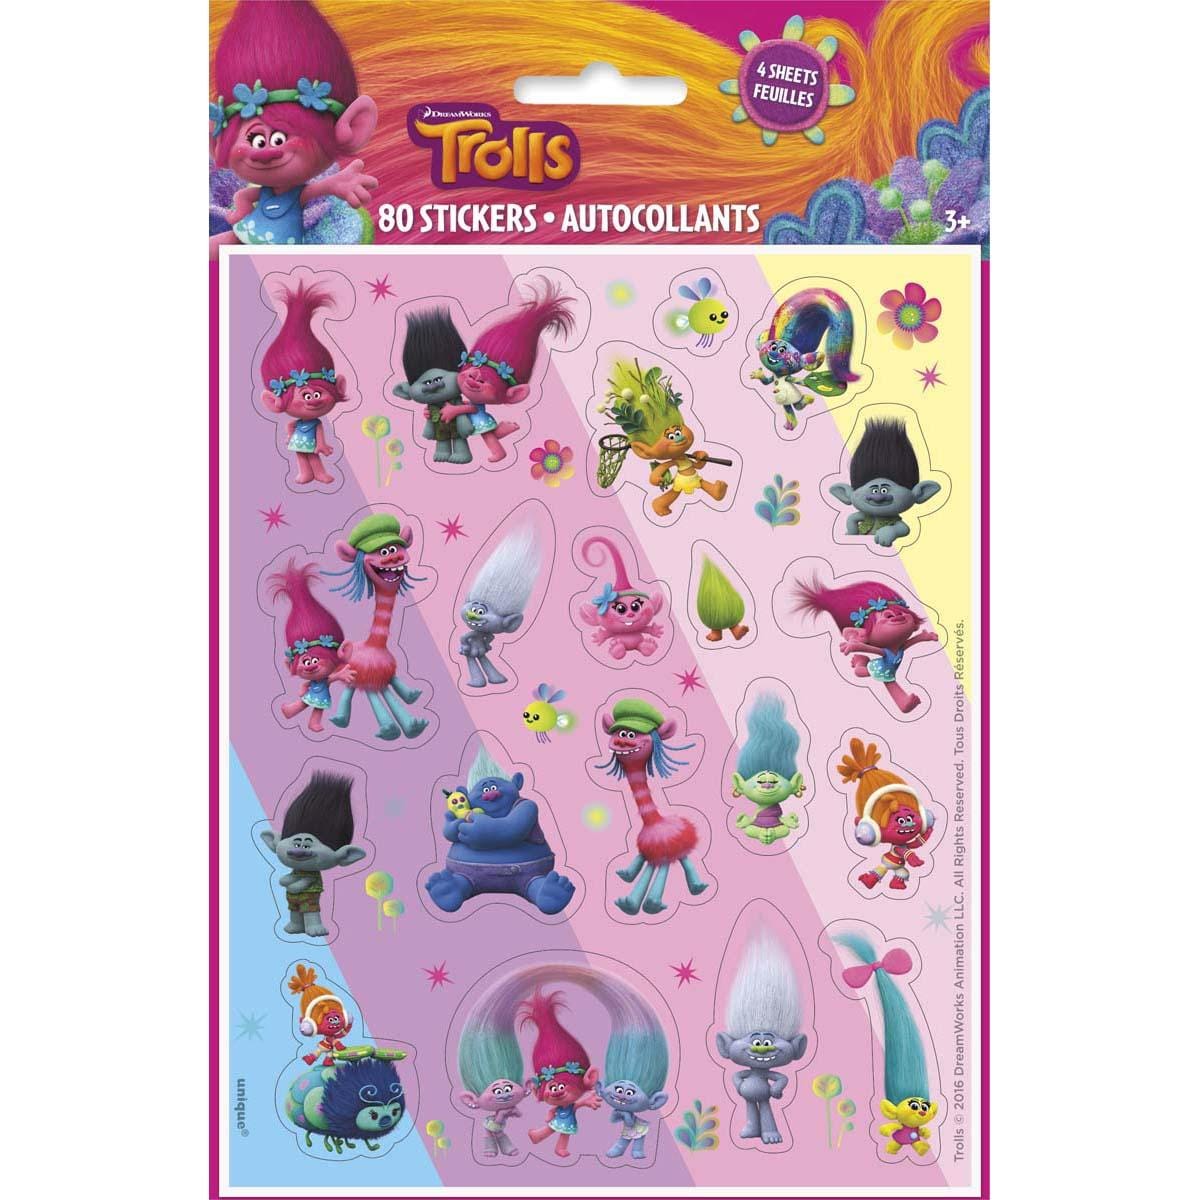 Buy Kids Birthday Trolls stickers, 80 per package sold at Party Expert